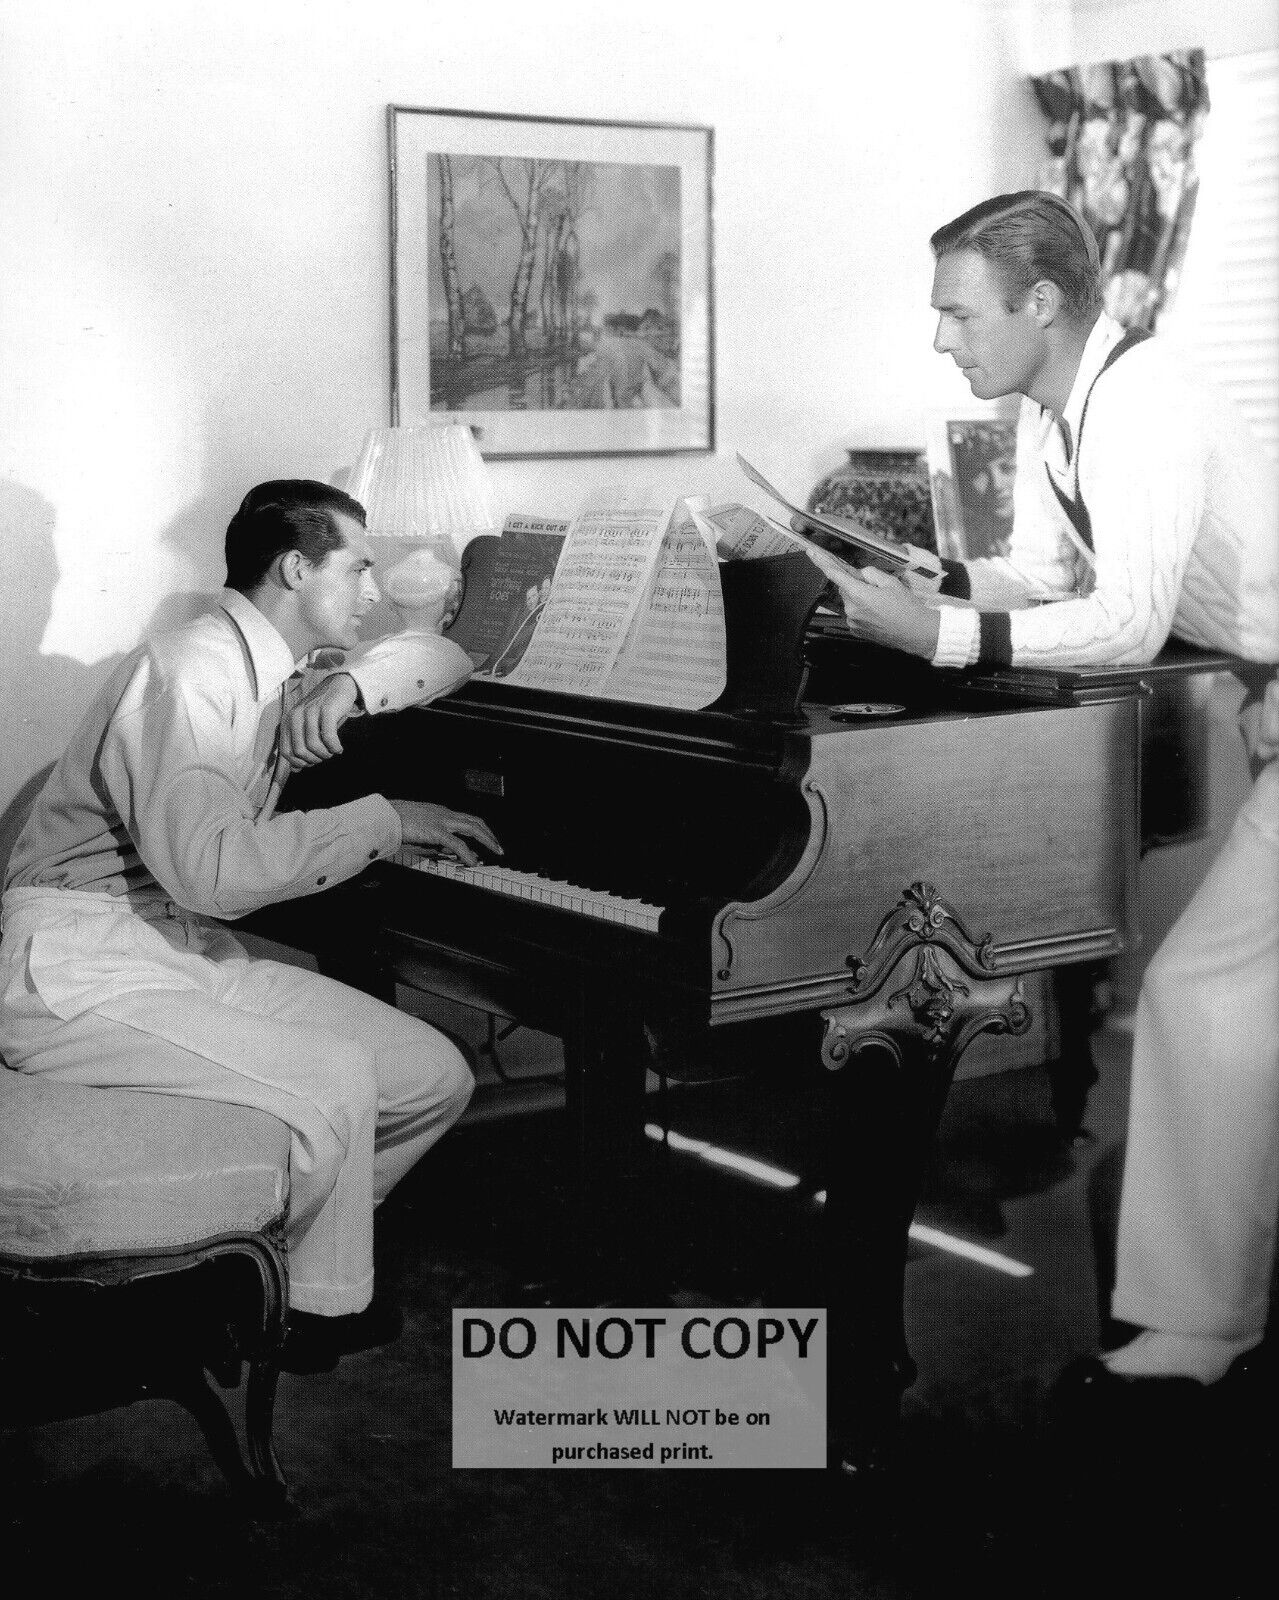 CARY GRANT AND RANDOLPH SCOTT HOLLYWOOD LEGENDS - 8X10 PUBLICITY PHOTO (EP-981)